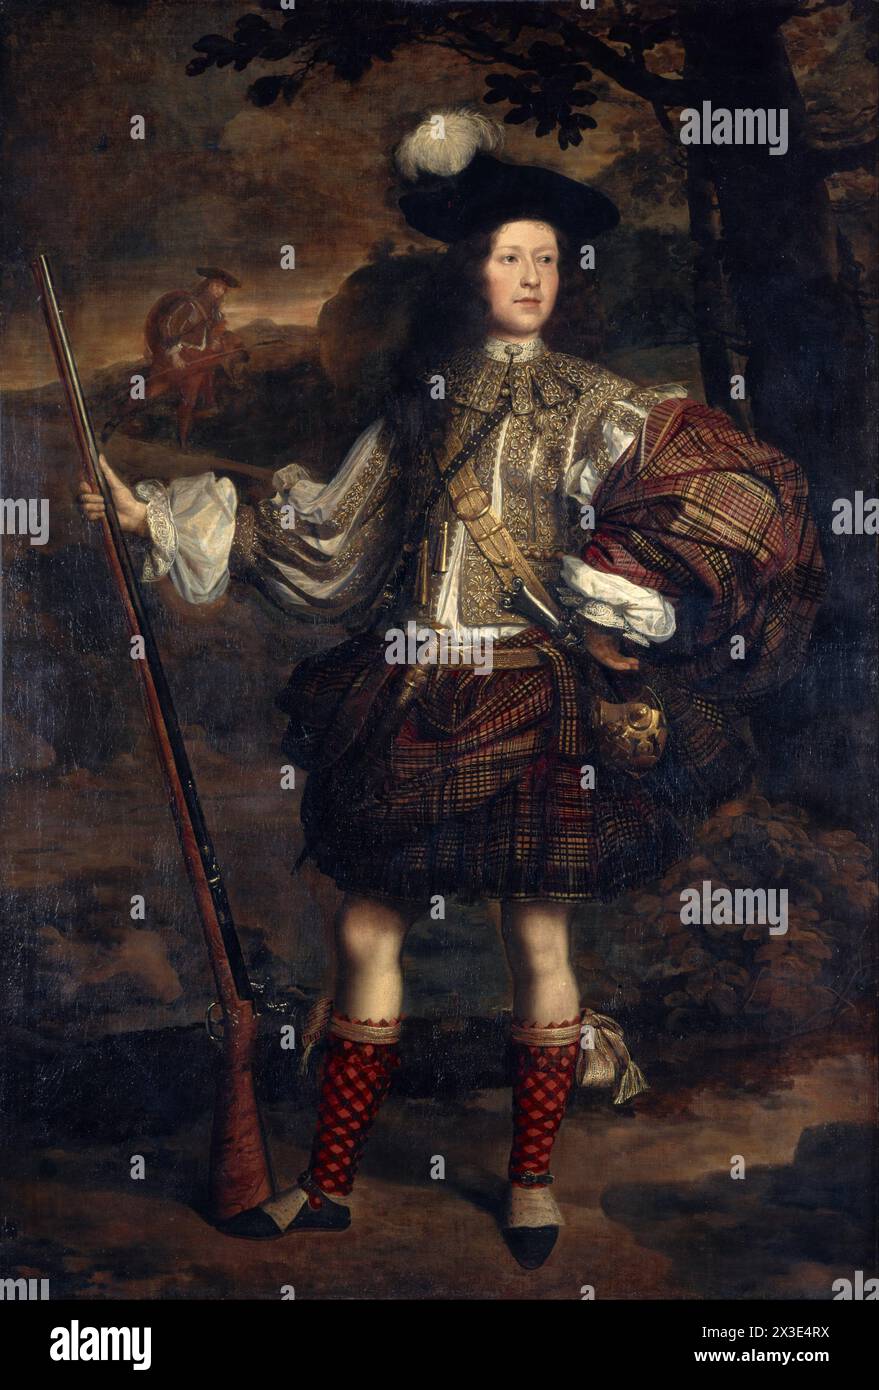 Lord Mungo Murray (c. 1683), Scottish National Portrait Gallery John Michael Wright Banque D'Images